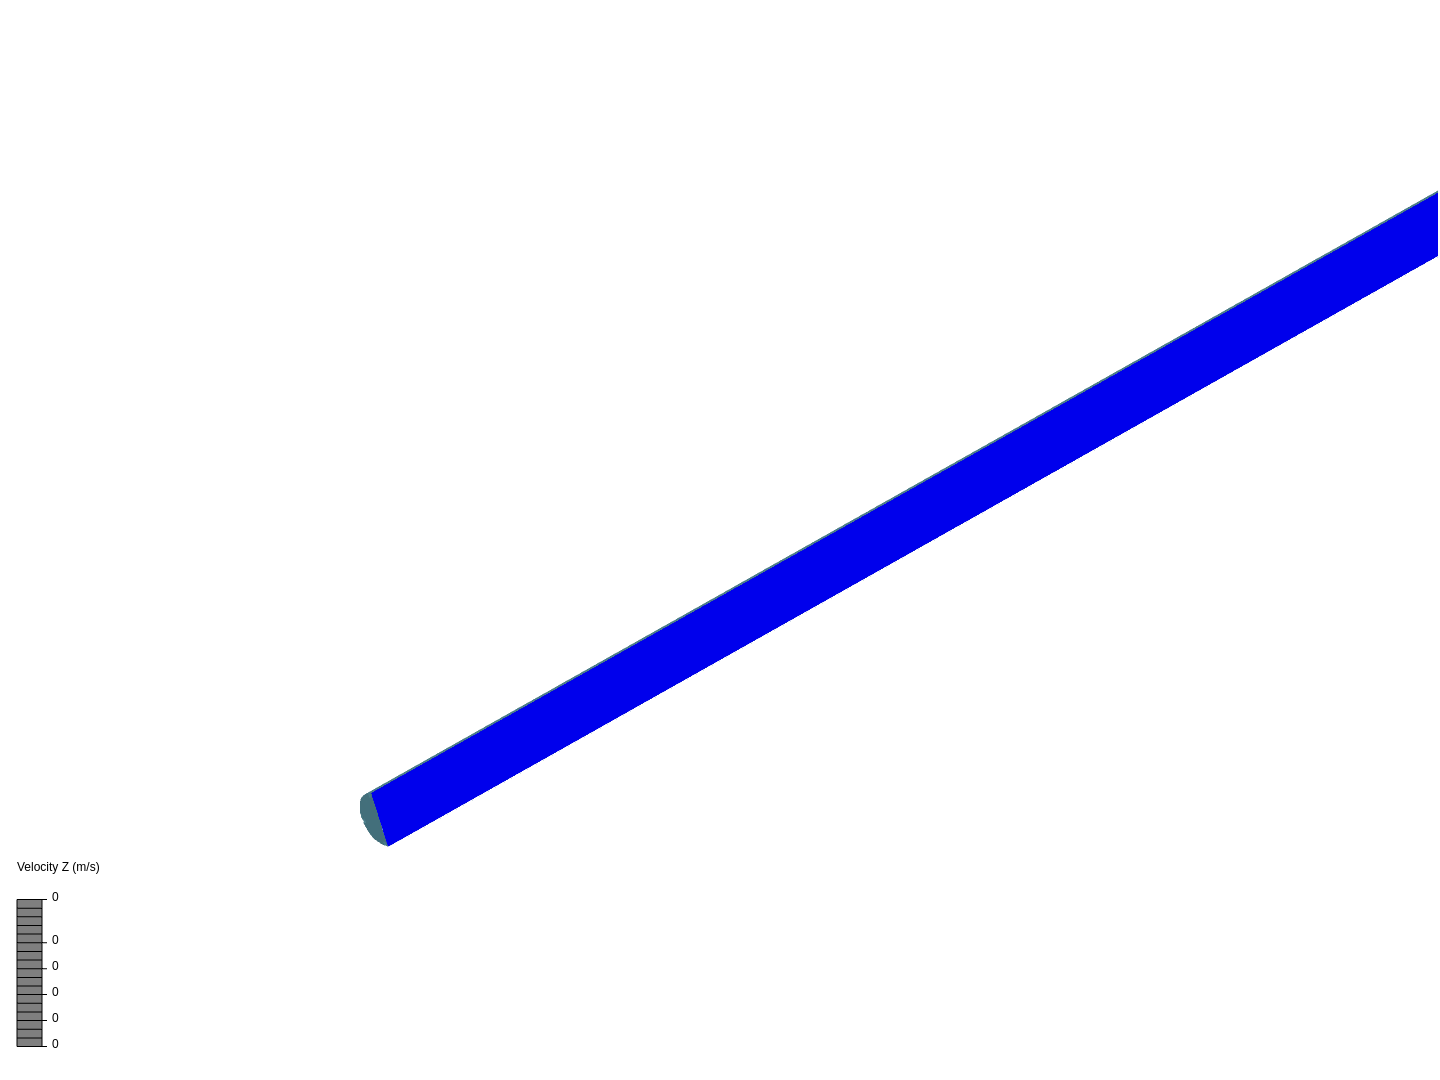 Laminar flow in a pipe 3 image